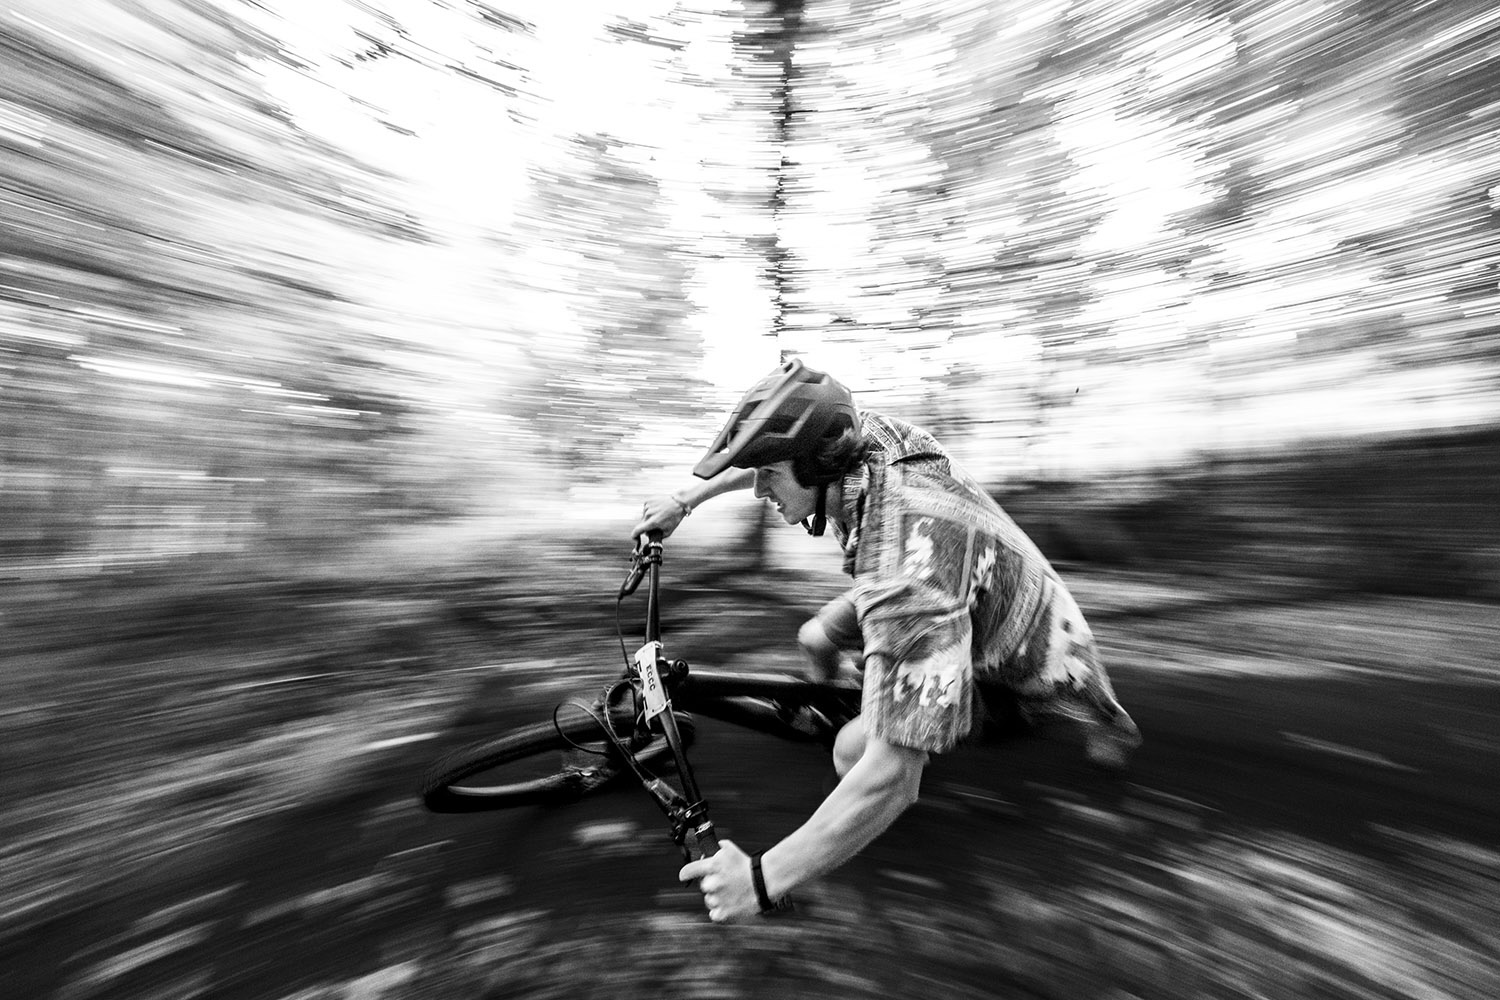 a black and white photograph of a racing bike rider in full motion heading around a banked surface   gripping the handle bars and the background in a motion blur.